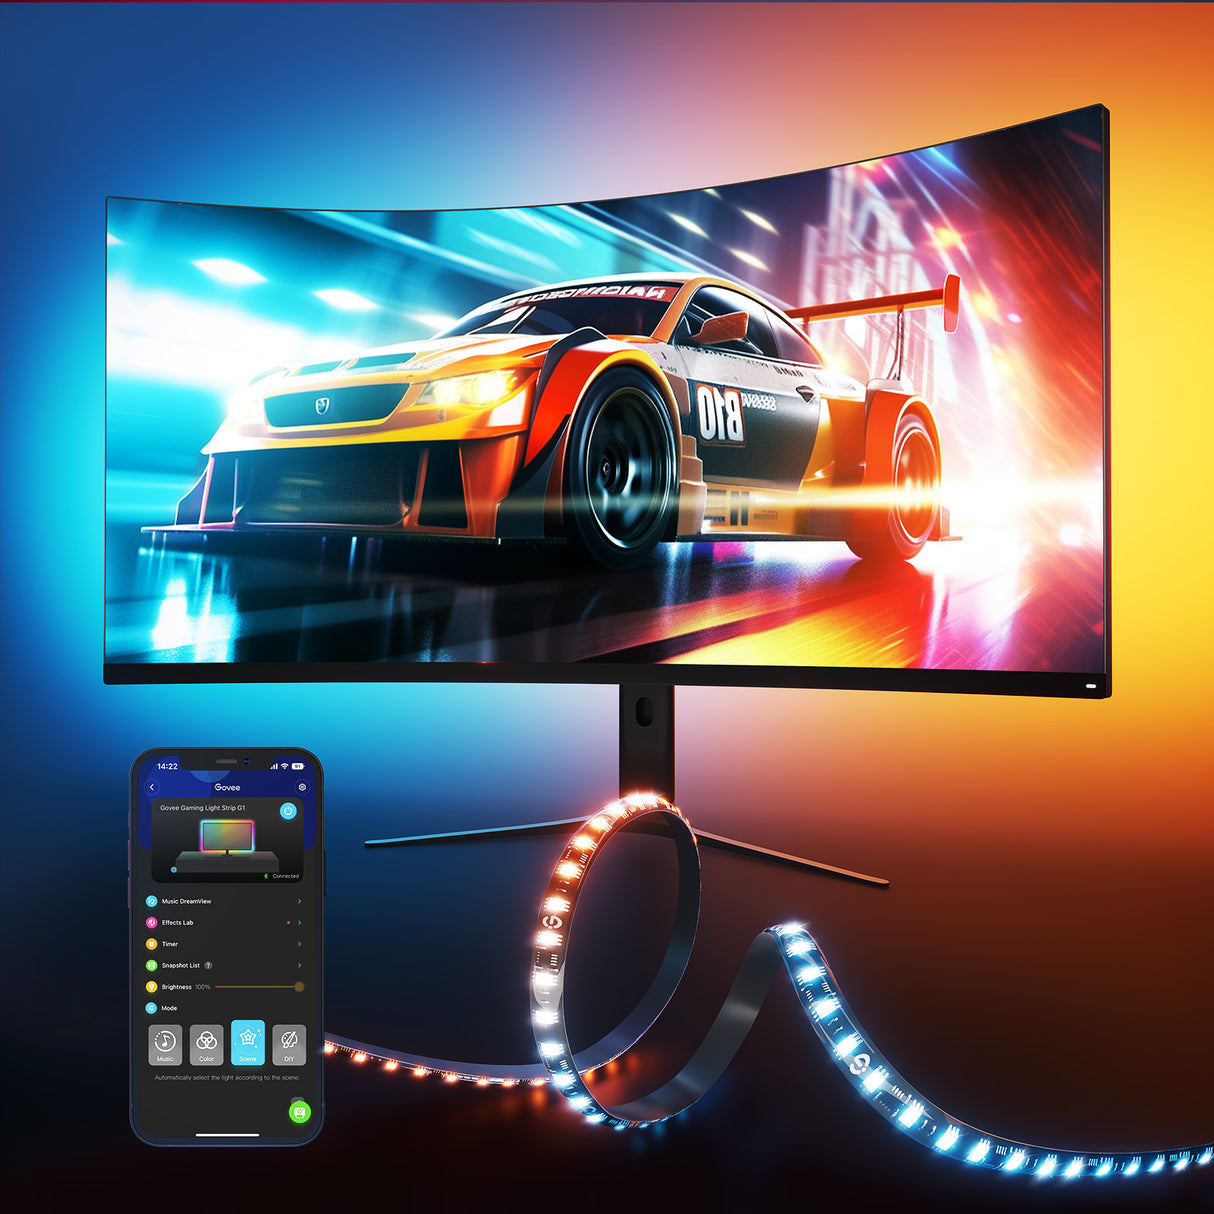 Govee AI Gaming Sync Box with Gaming Light Bars & Smart LED Light Stri –  Govee South Africa